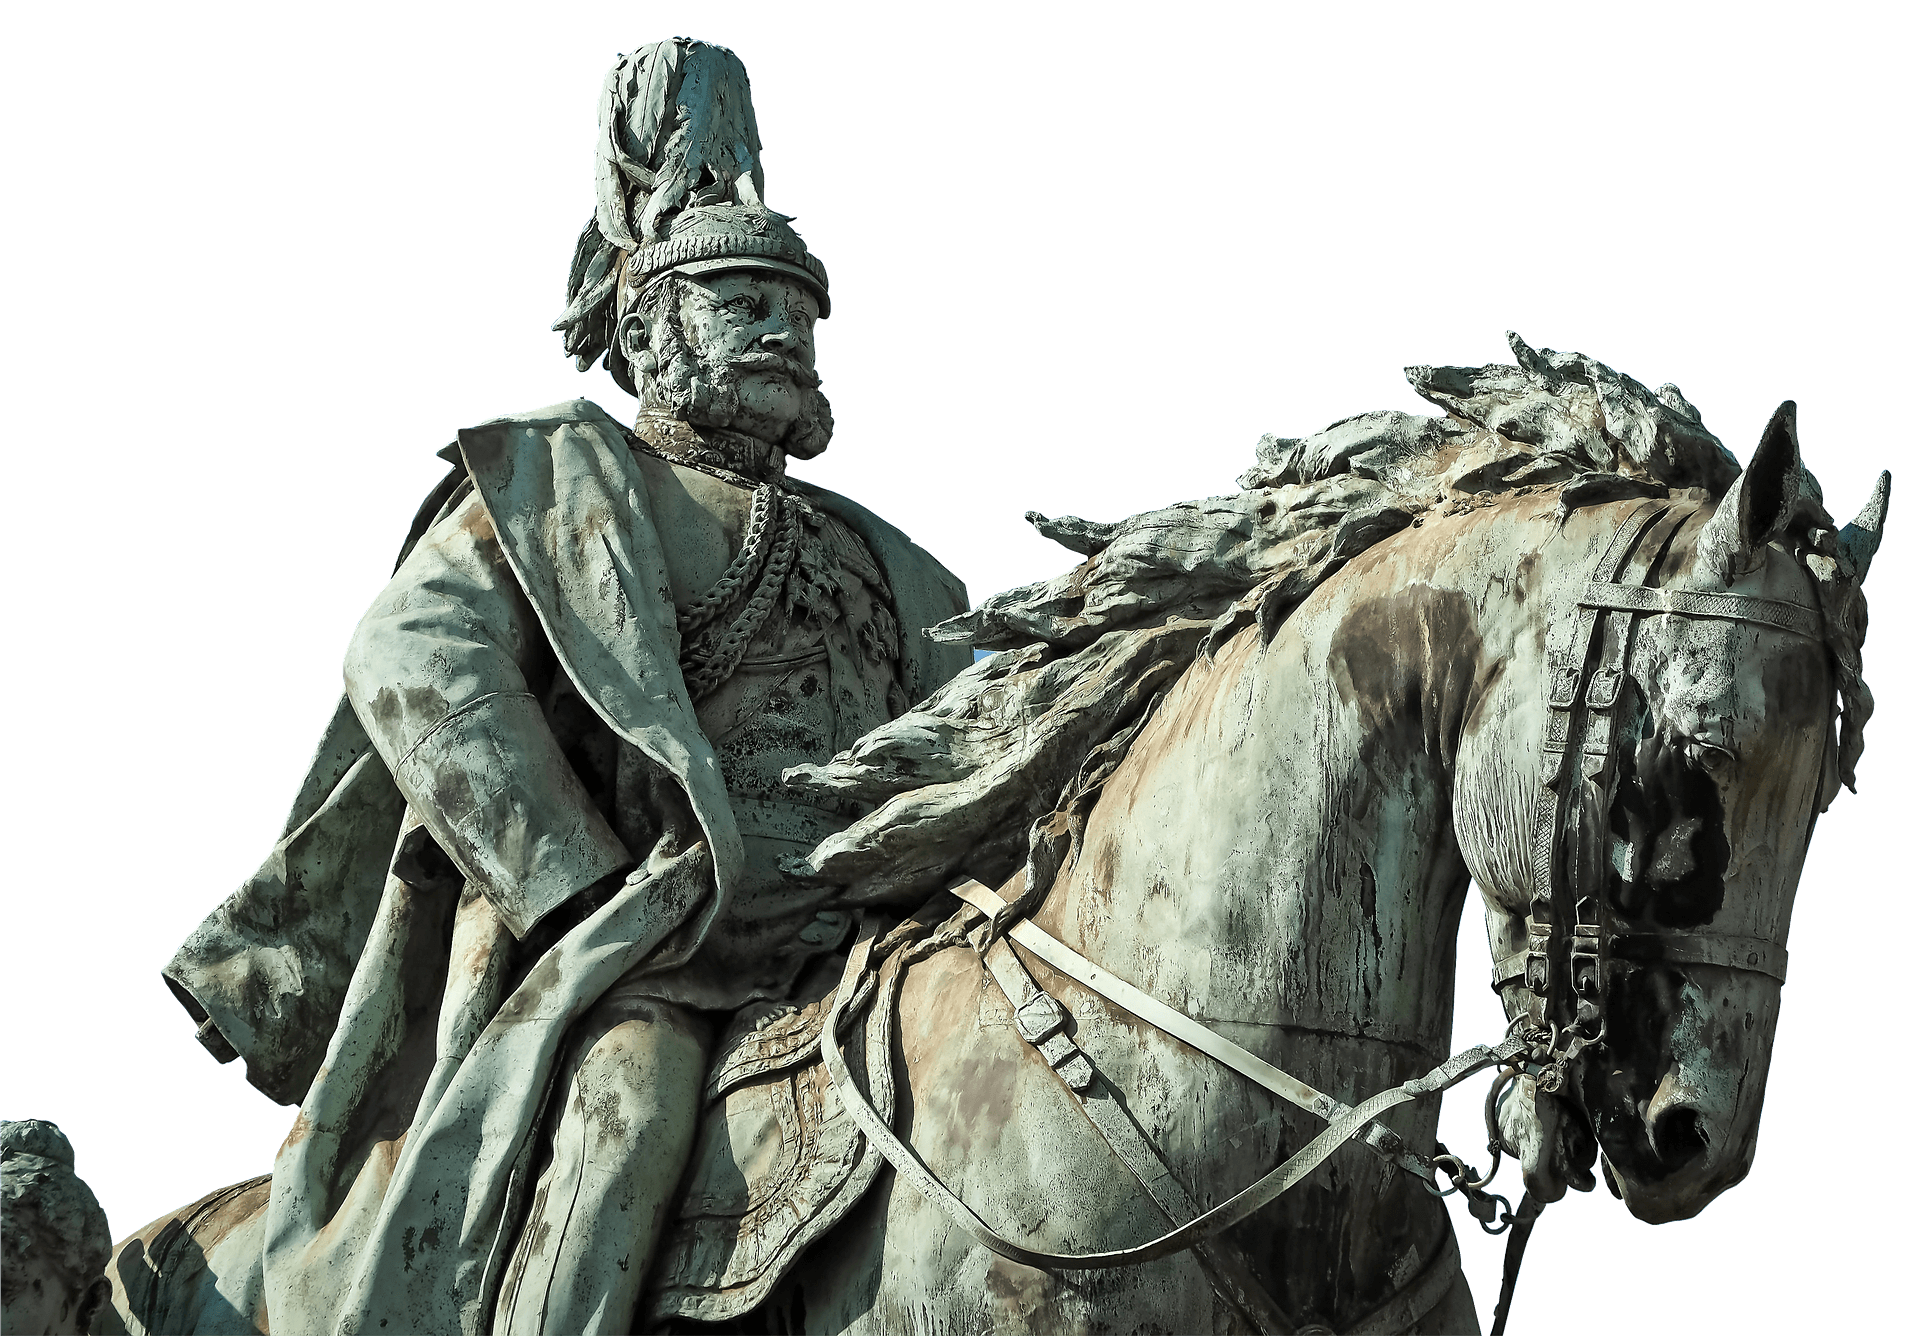 A statue of a general on a horse